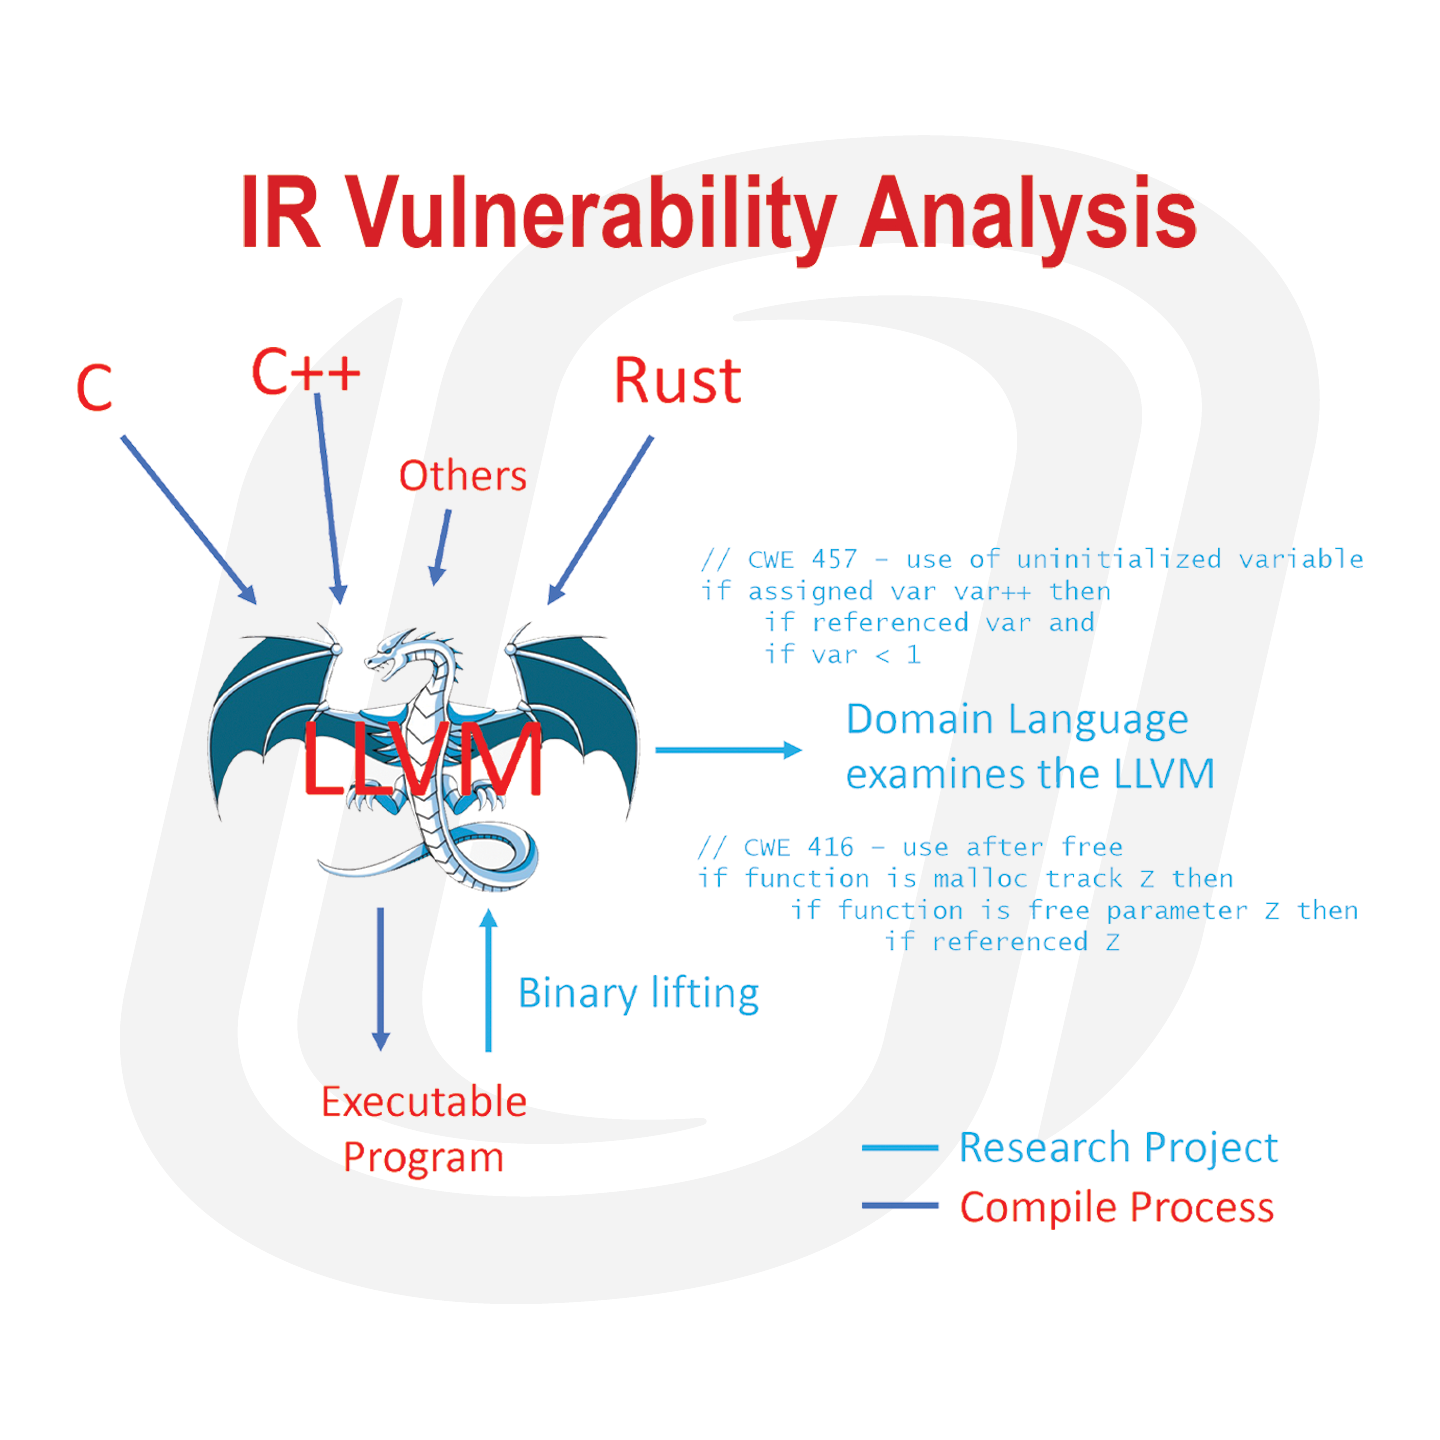 an overview/diagram that outlines the process of ir vulnerability analysis